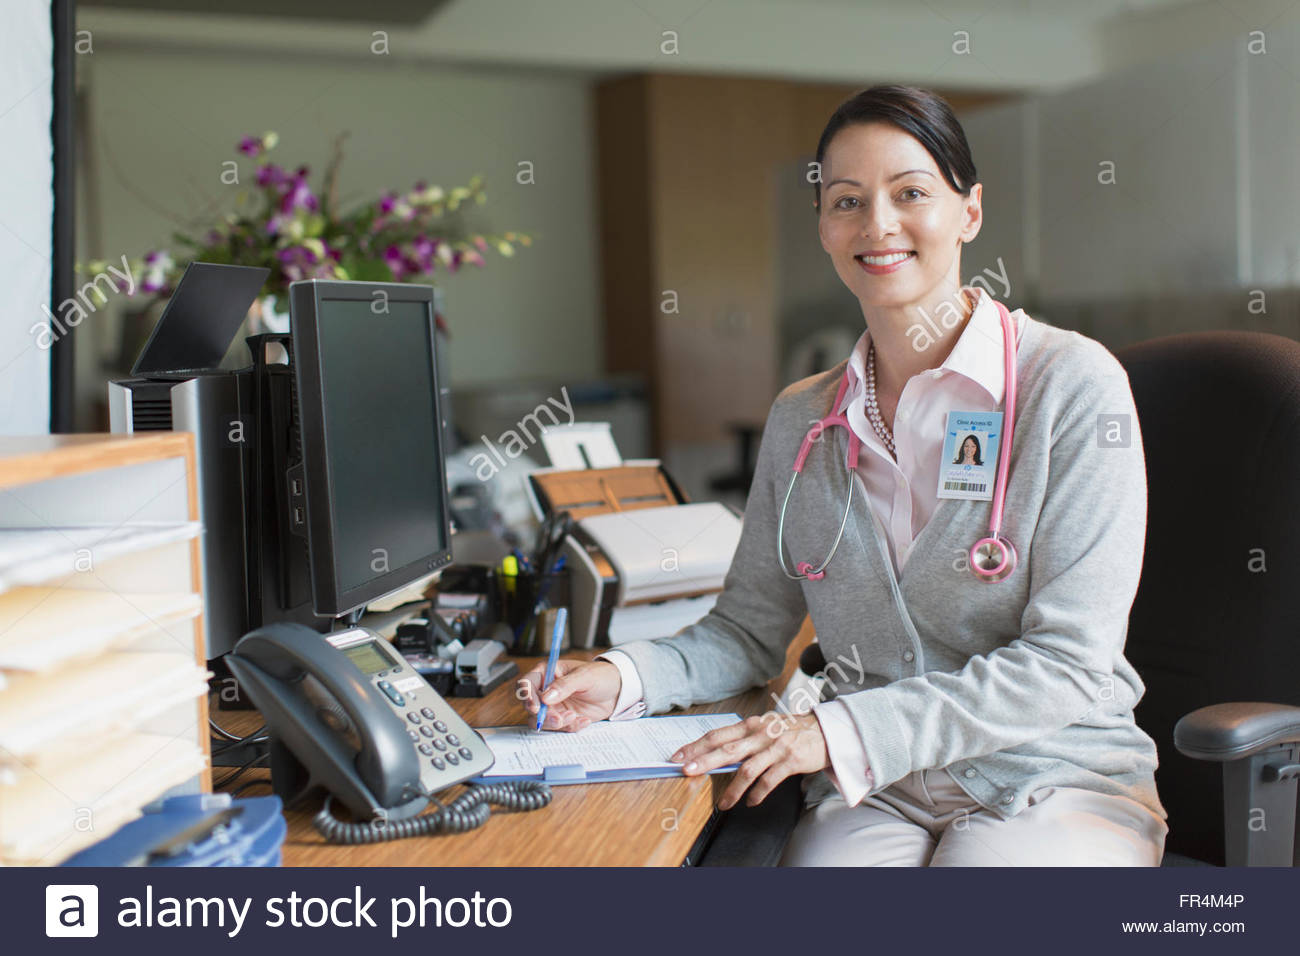 female doctor filling in chart at desk Stock Photo